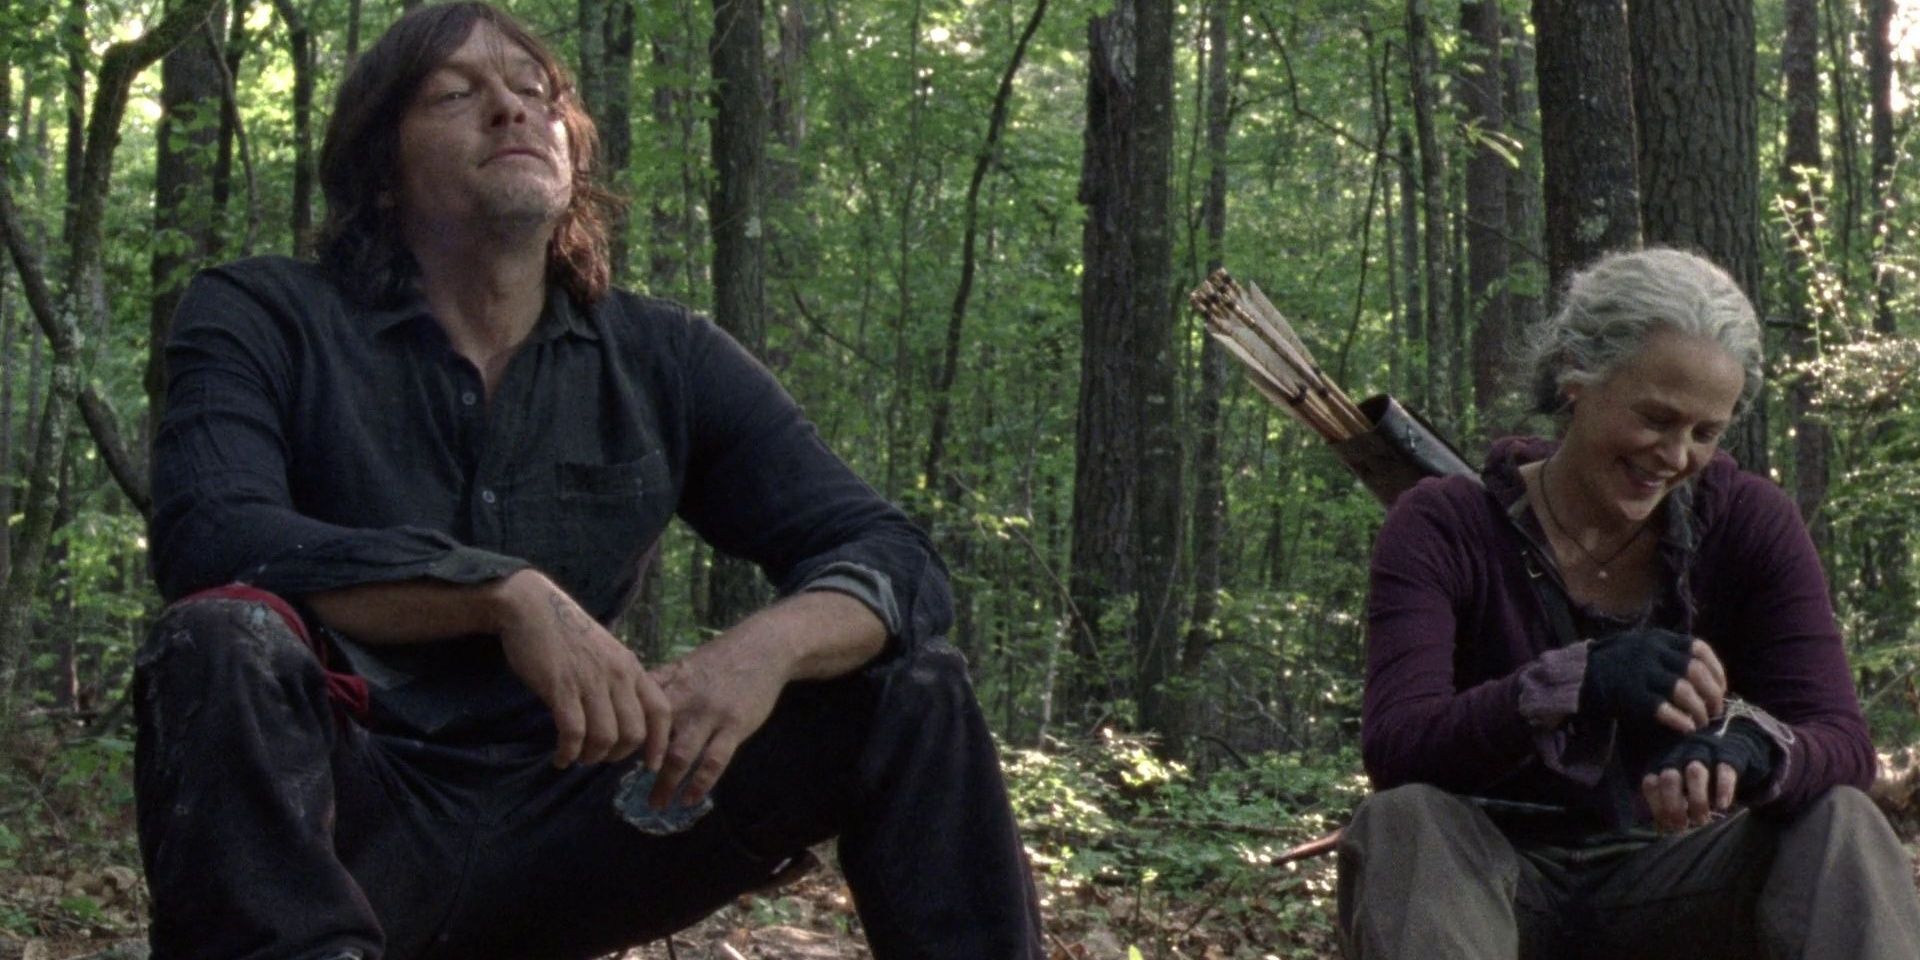 Daryl and Carol sitting with the friendship bracelet in Season 10 Episode 1 of The Walking Dead